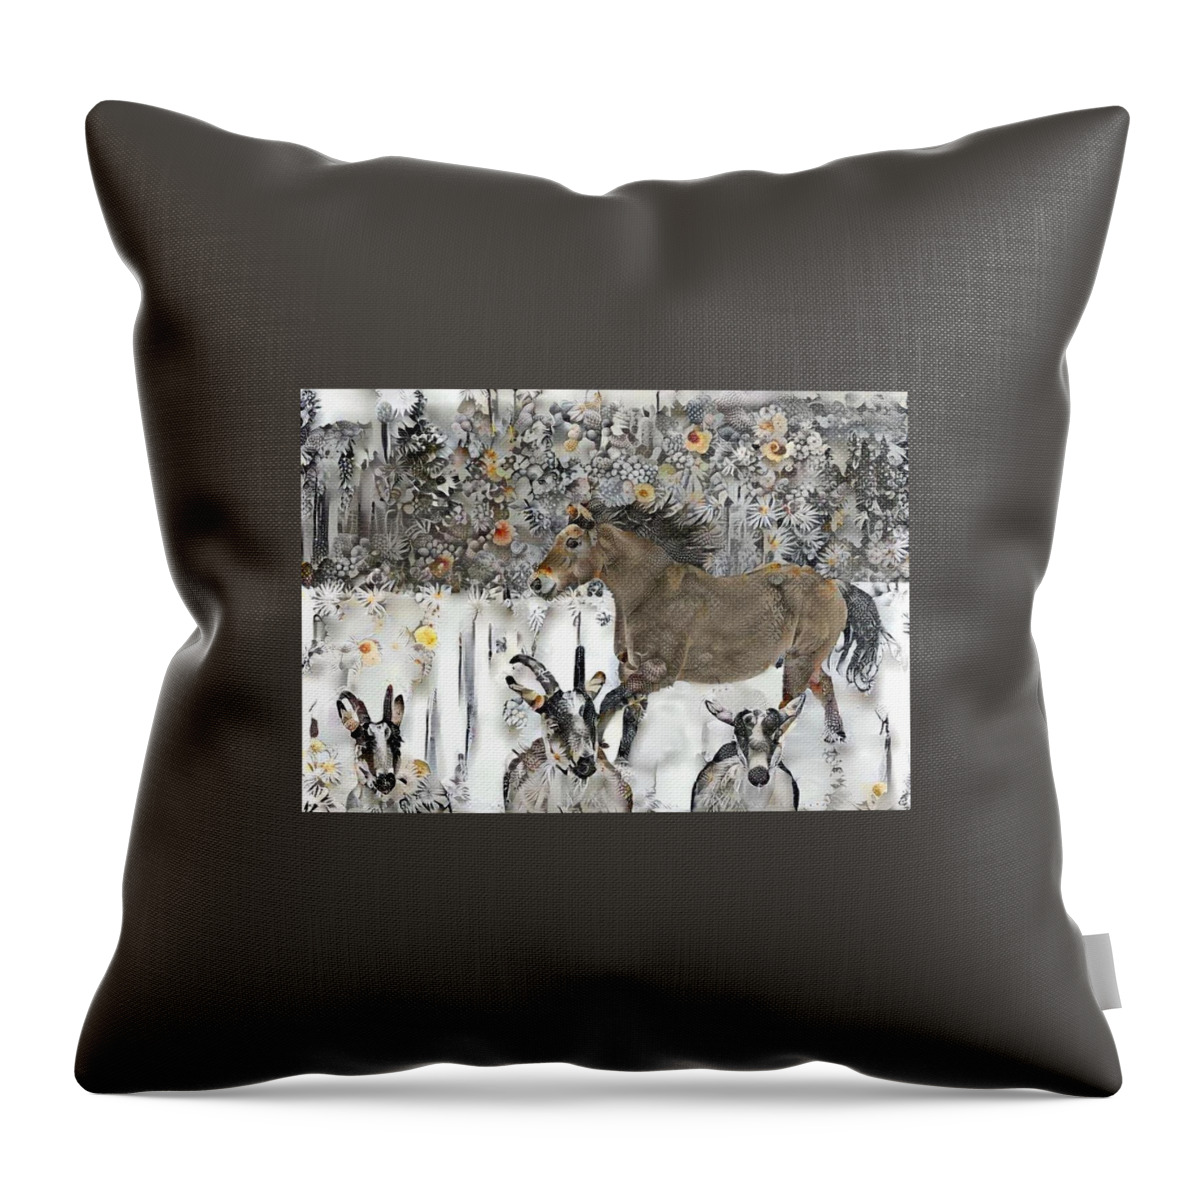 Brown Horse Throw Pillow featuring the digital art Goat Theatre - Digital 3 by Listen To Your Horse